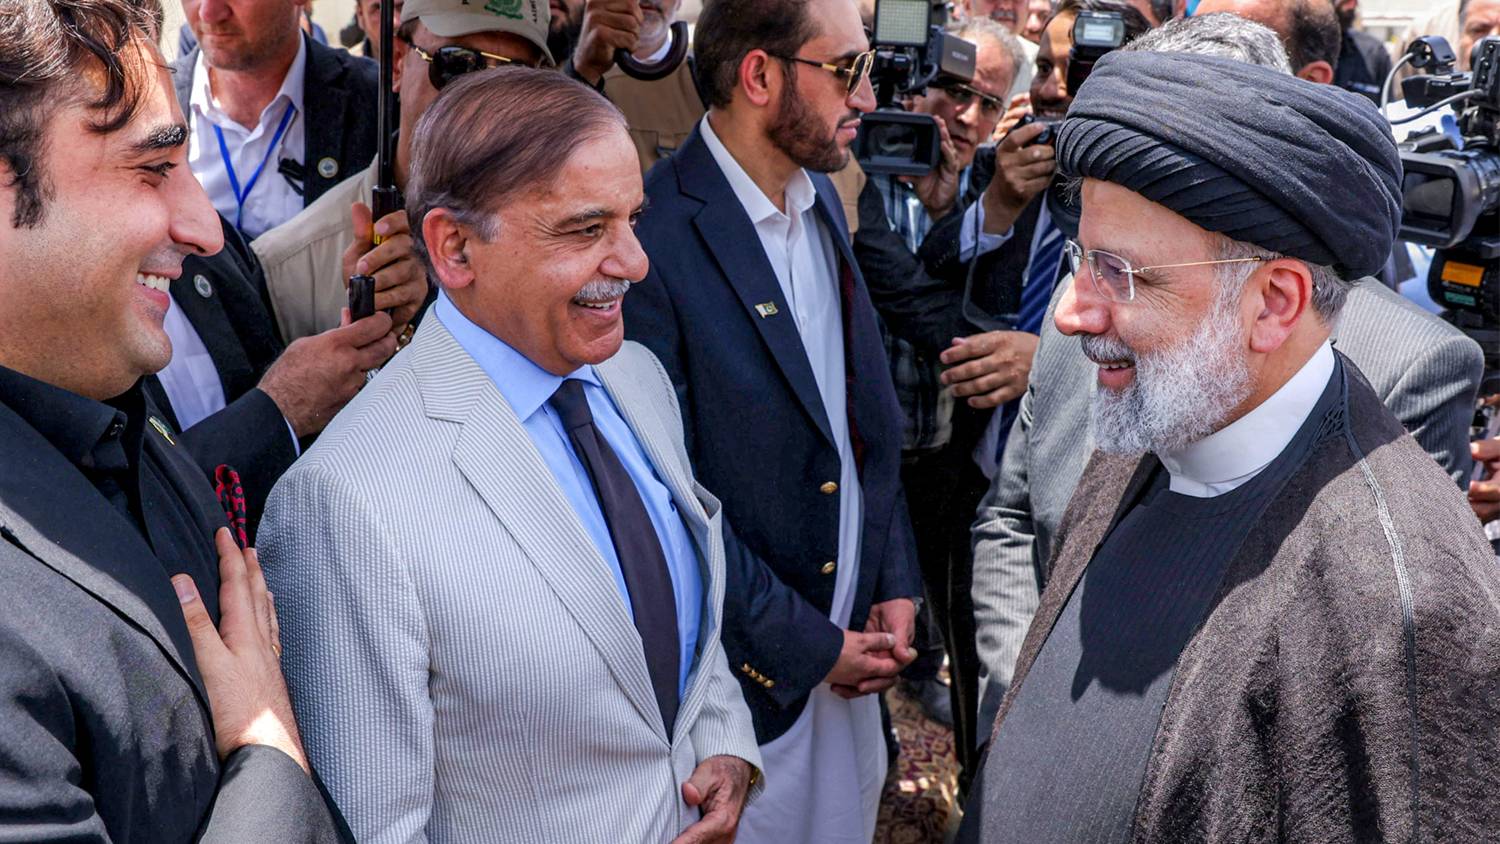 Iran's President Ebrahim Raisi and Pakistan's then-prime minister Shahbaz Sharif attend a ceremony to inaugurate a new market in the border city of Pishin, Iran on 18 May 2023.